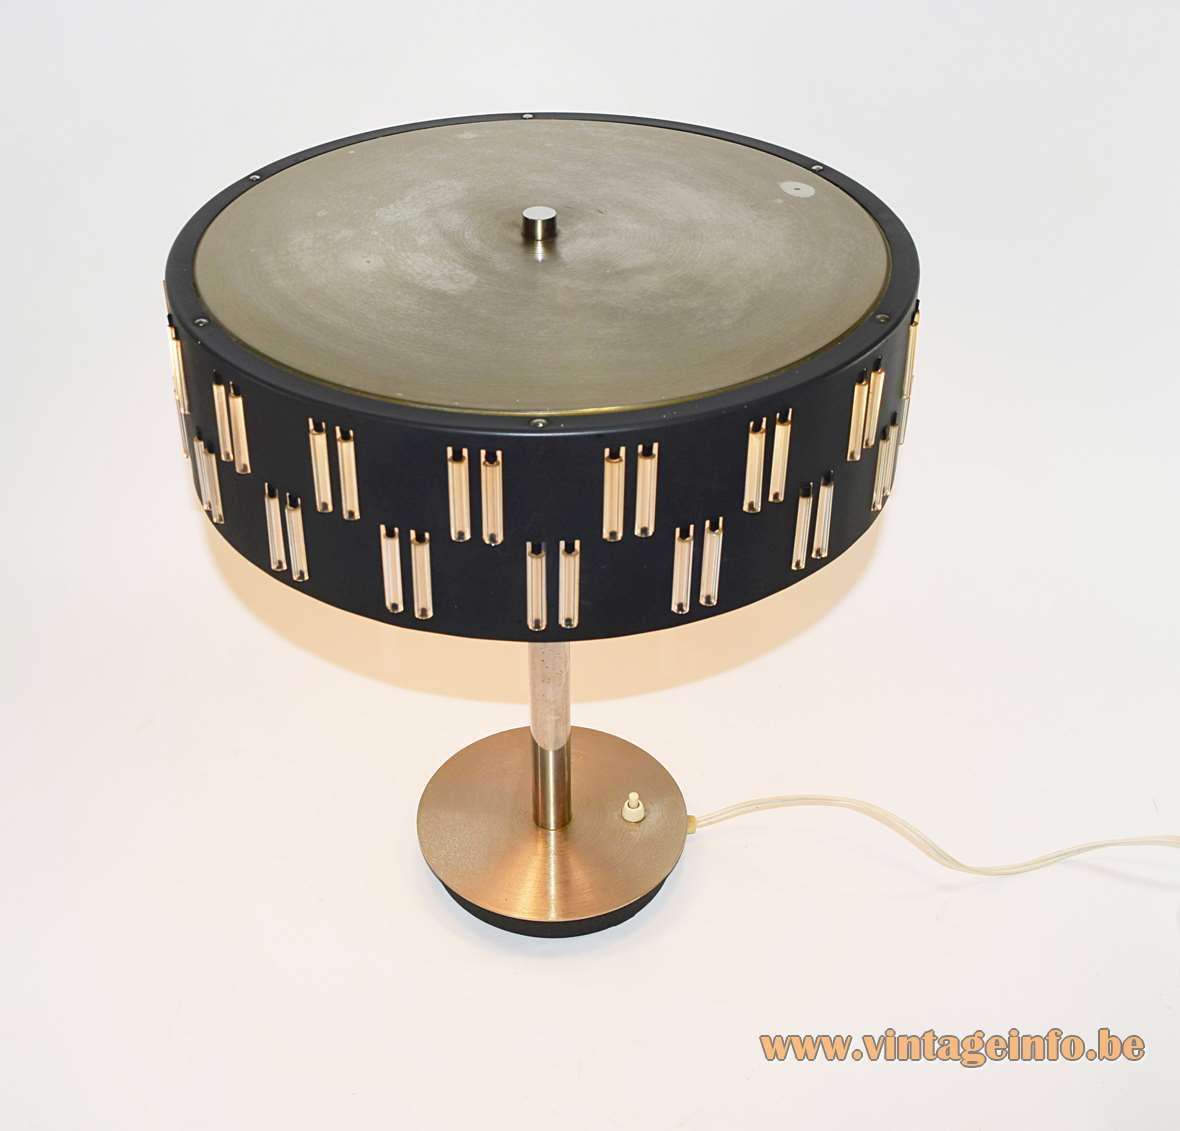 1960s Schmahl & Schulz table lamp black mushroom lampshade small glass rods chrome base design: Petersen Germany